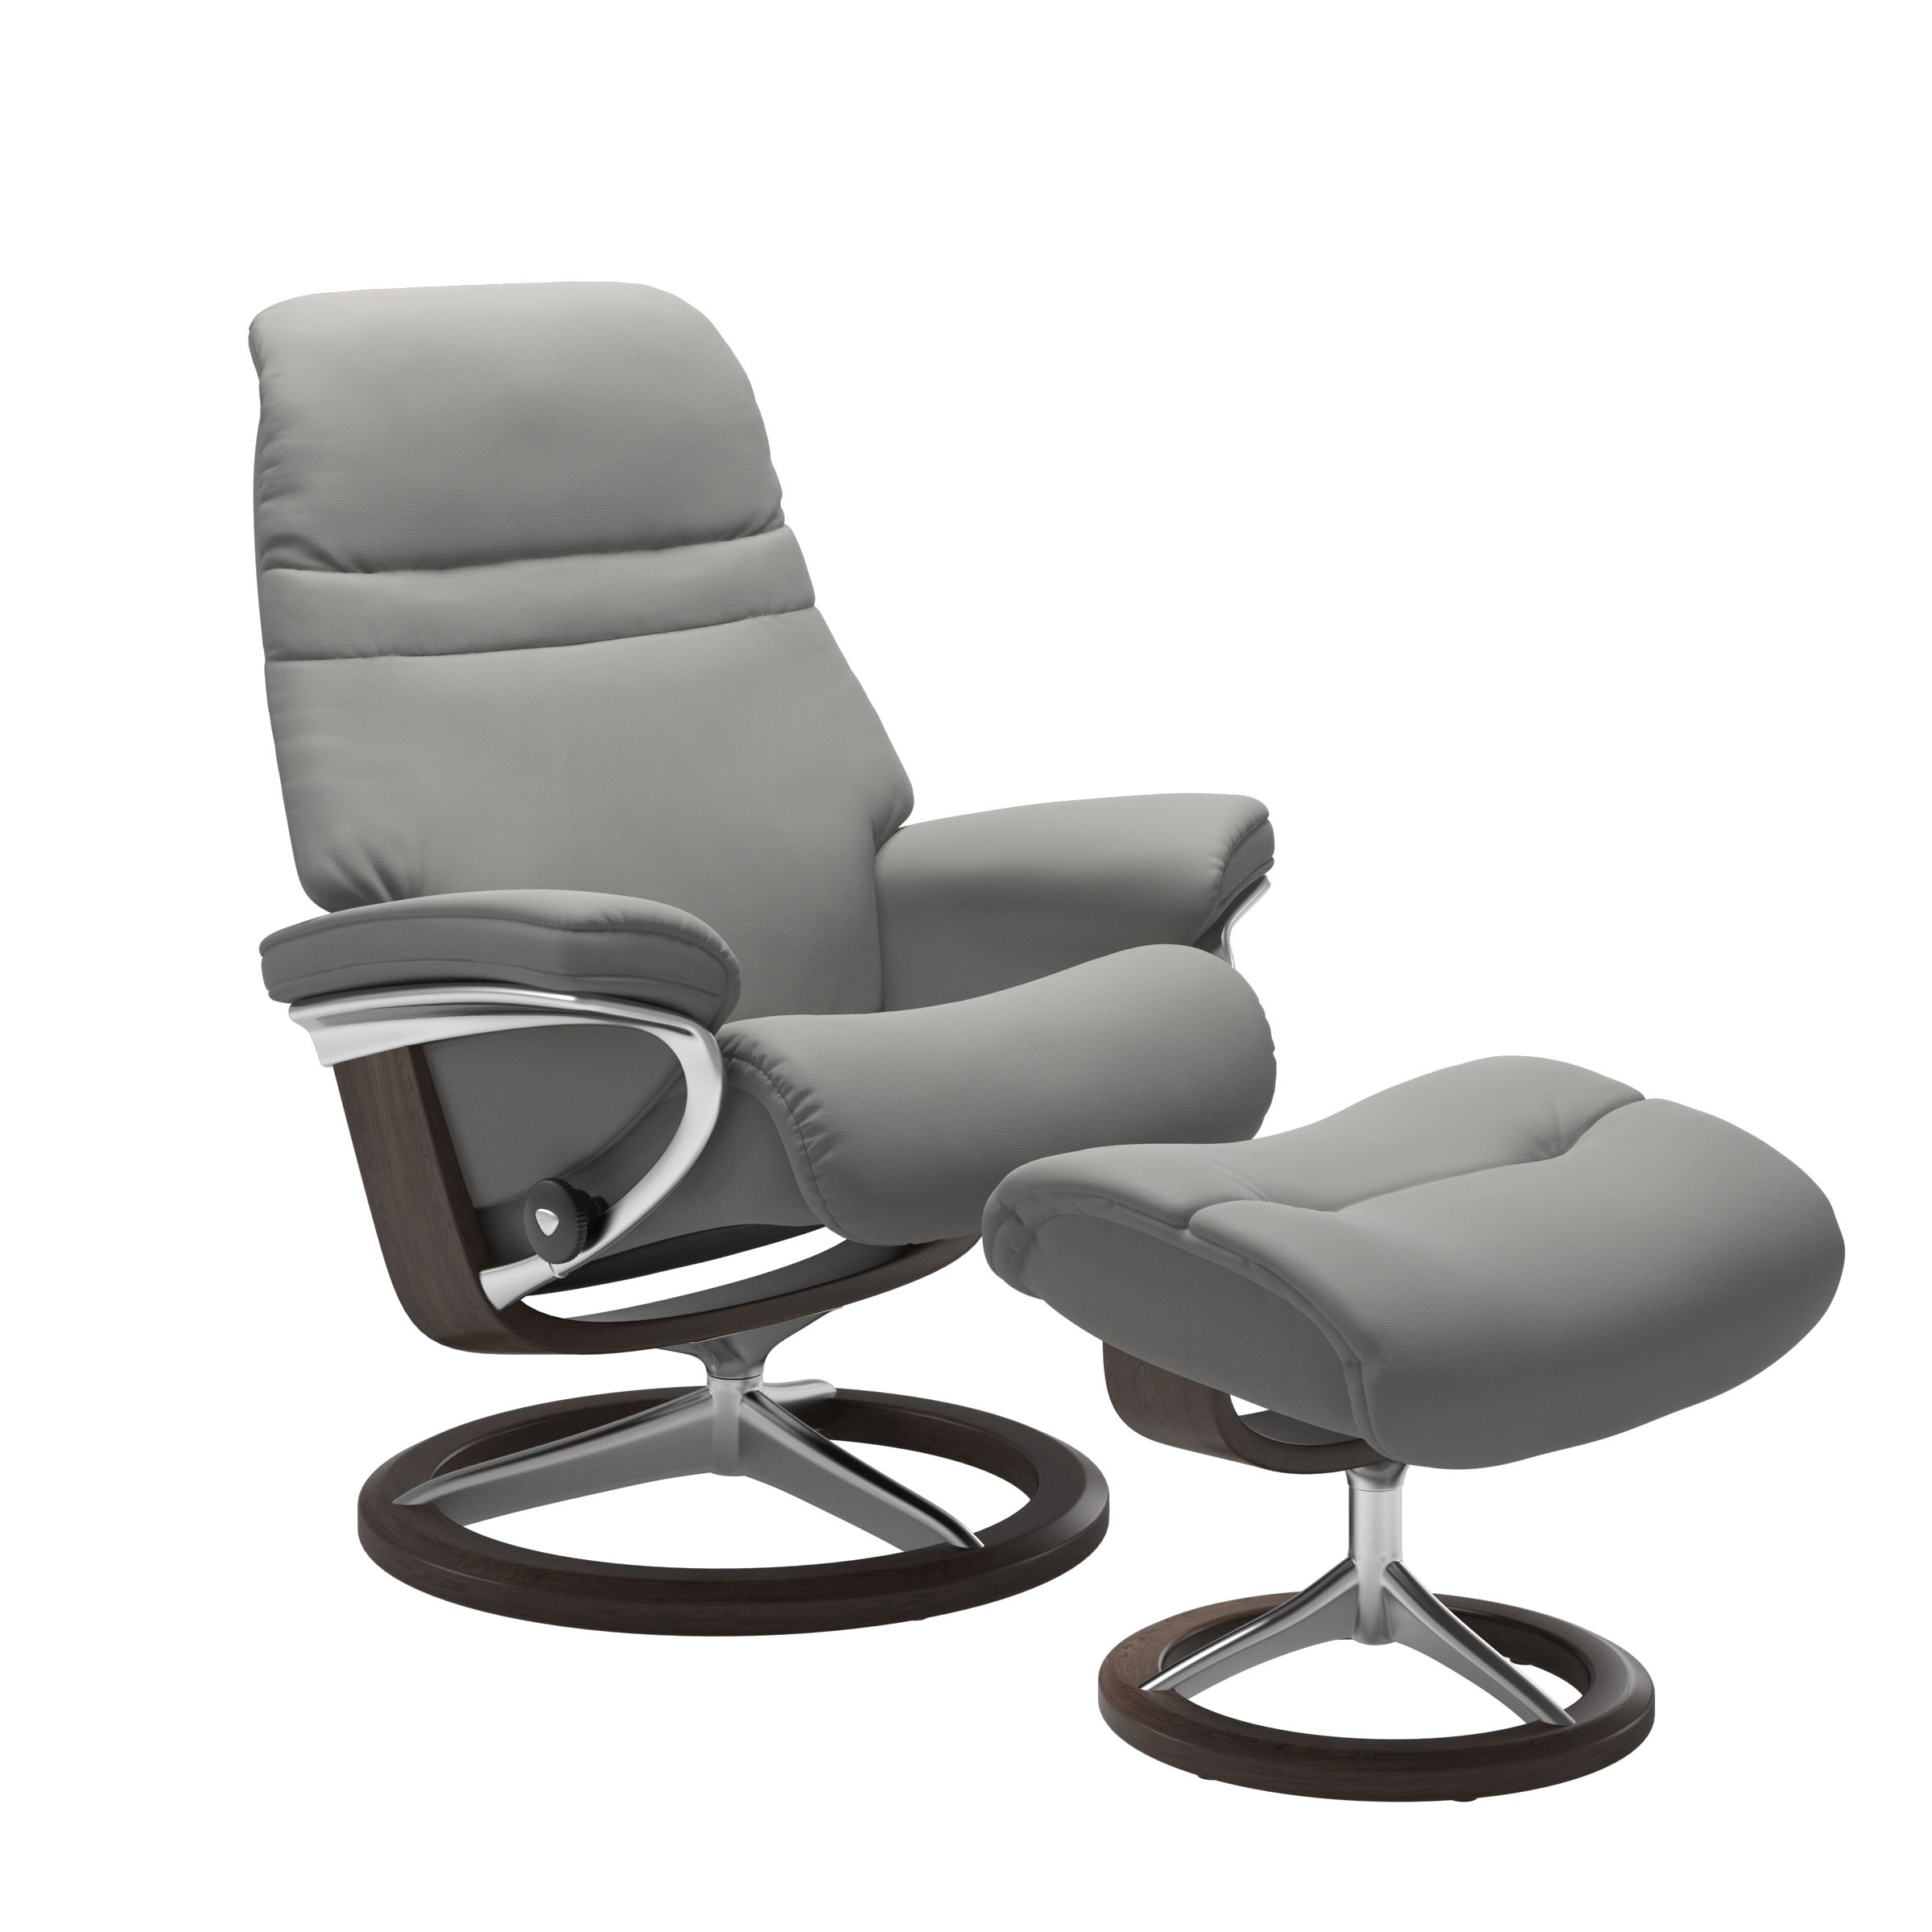 Stressless Sunrise Large Recliner and Ottoman with Signature Base